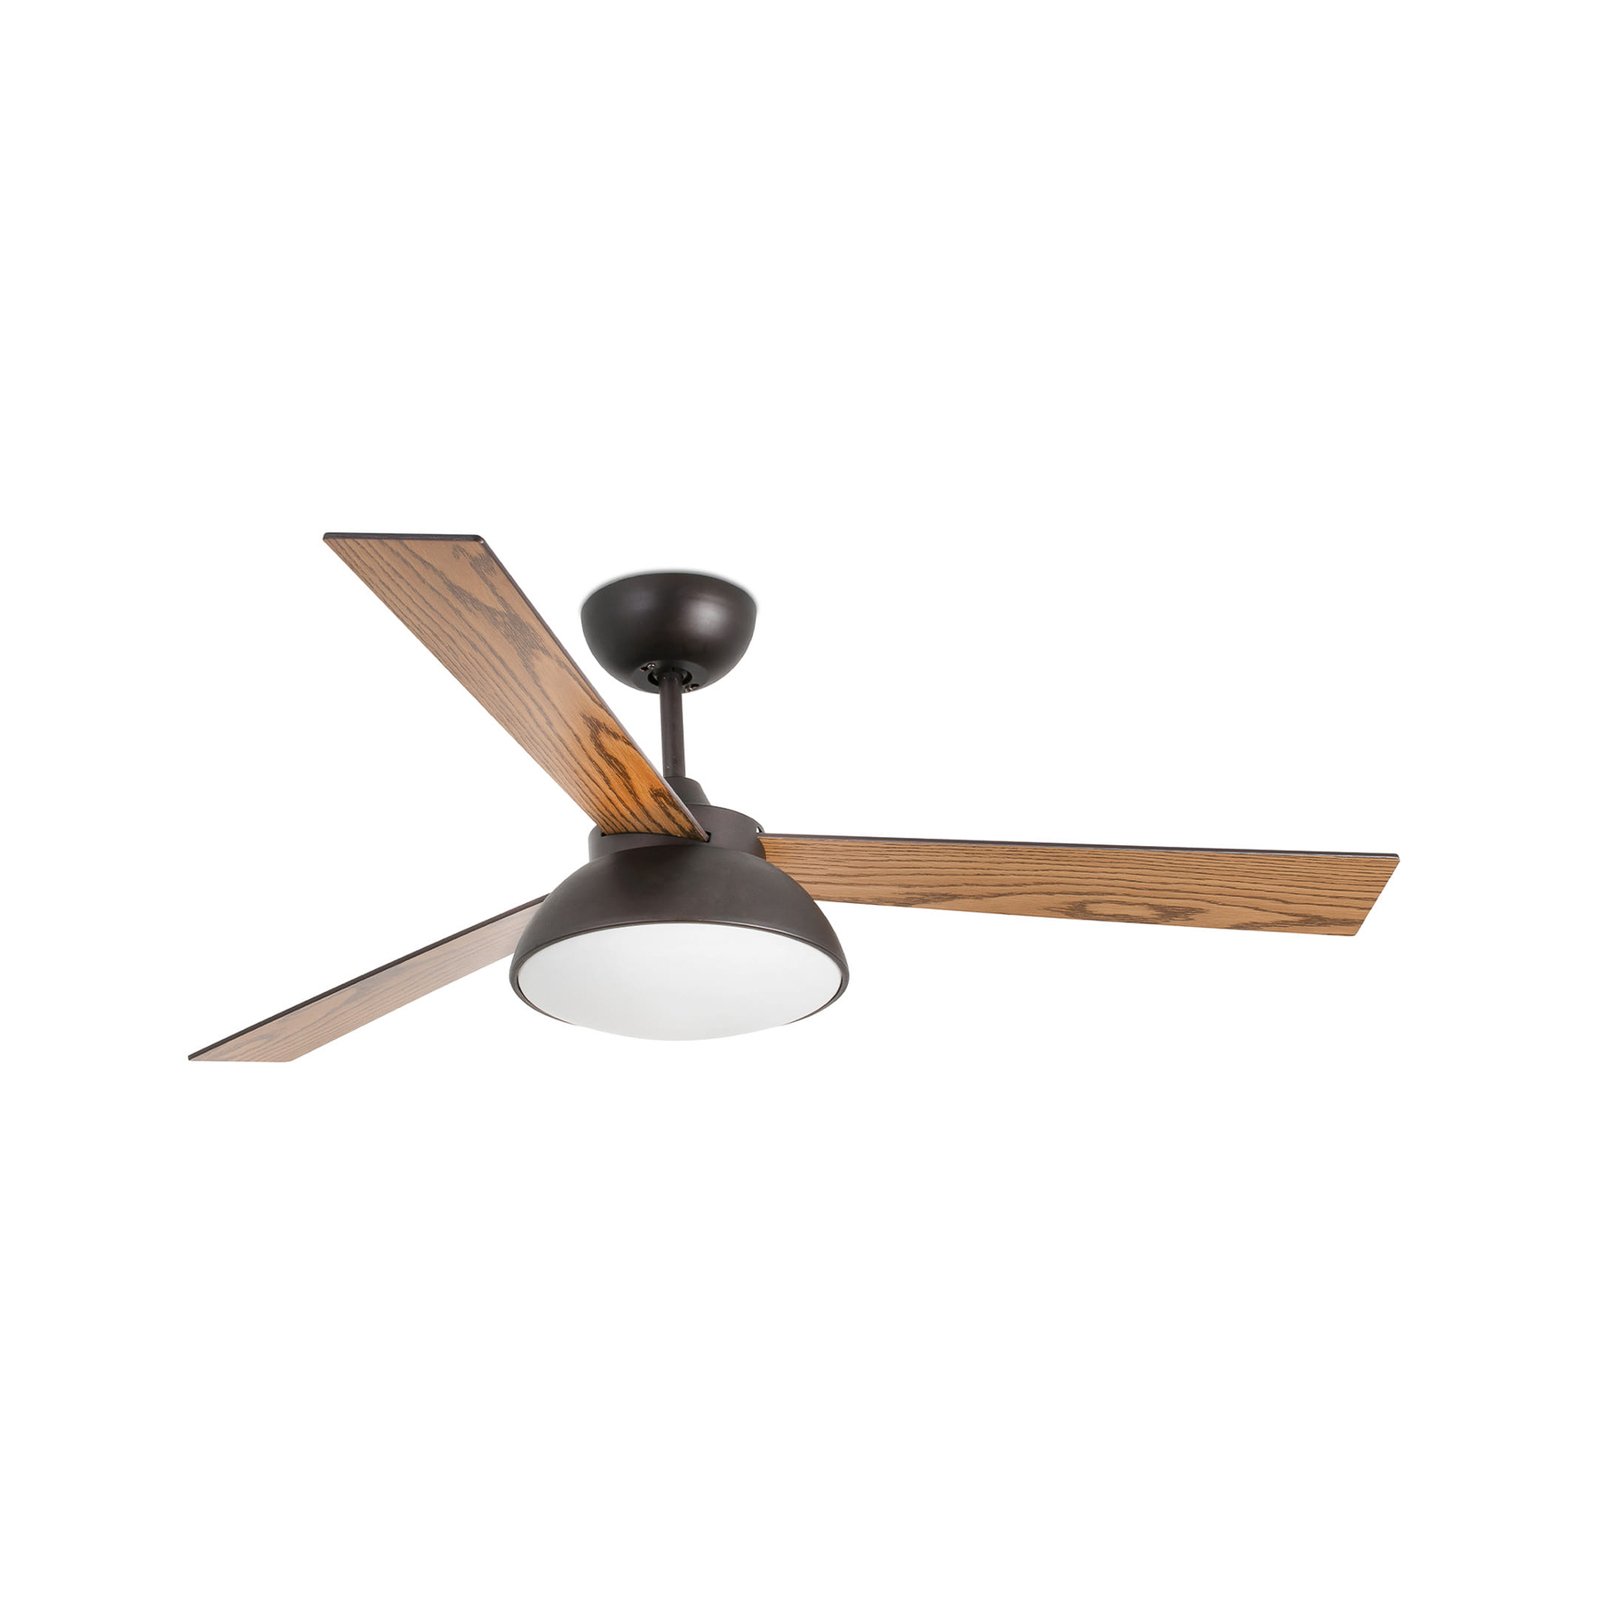 Rodas ceiling fan with an LED light, brown